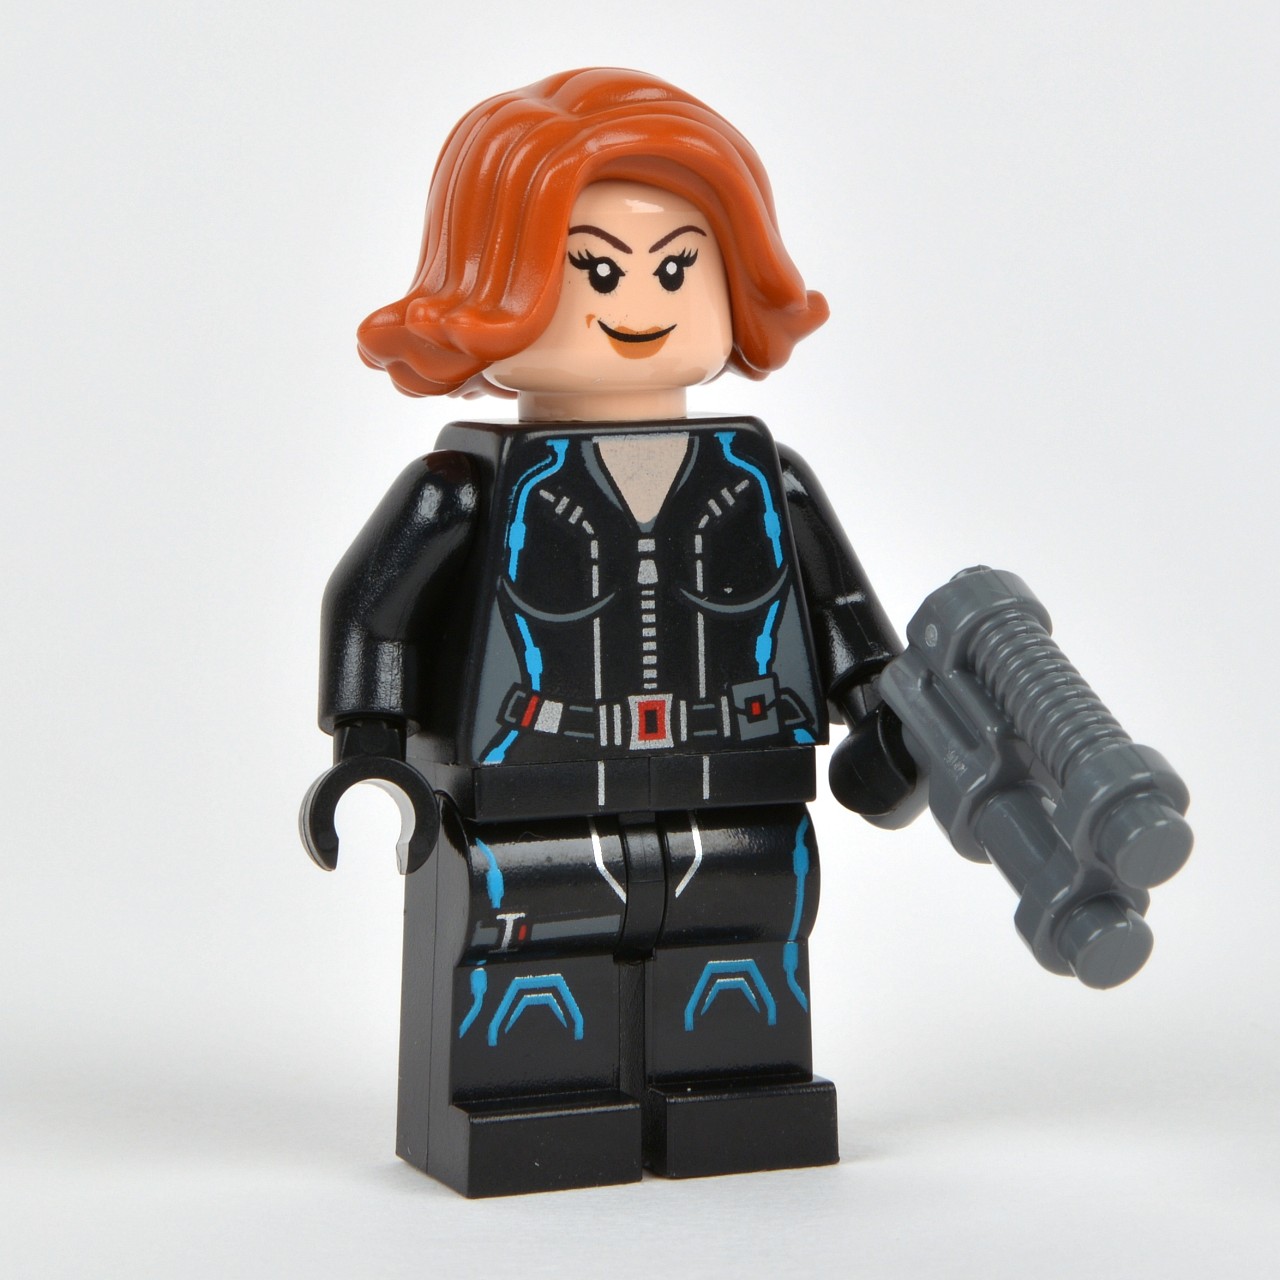 this is a picture of someones lego figure